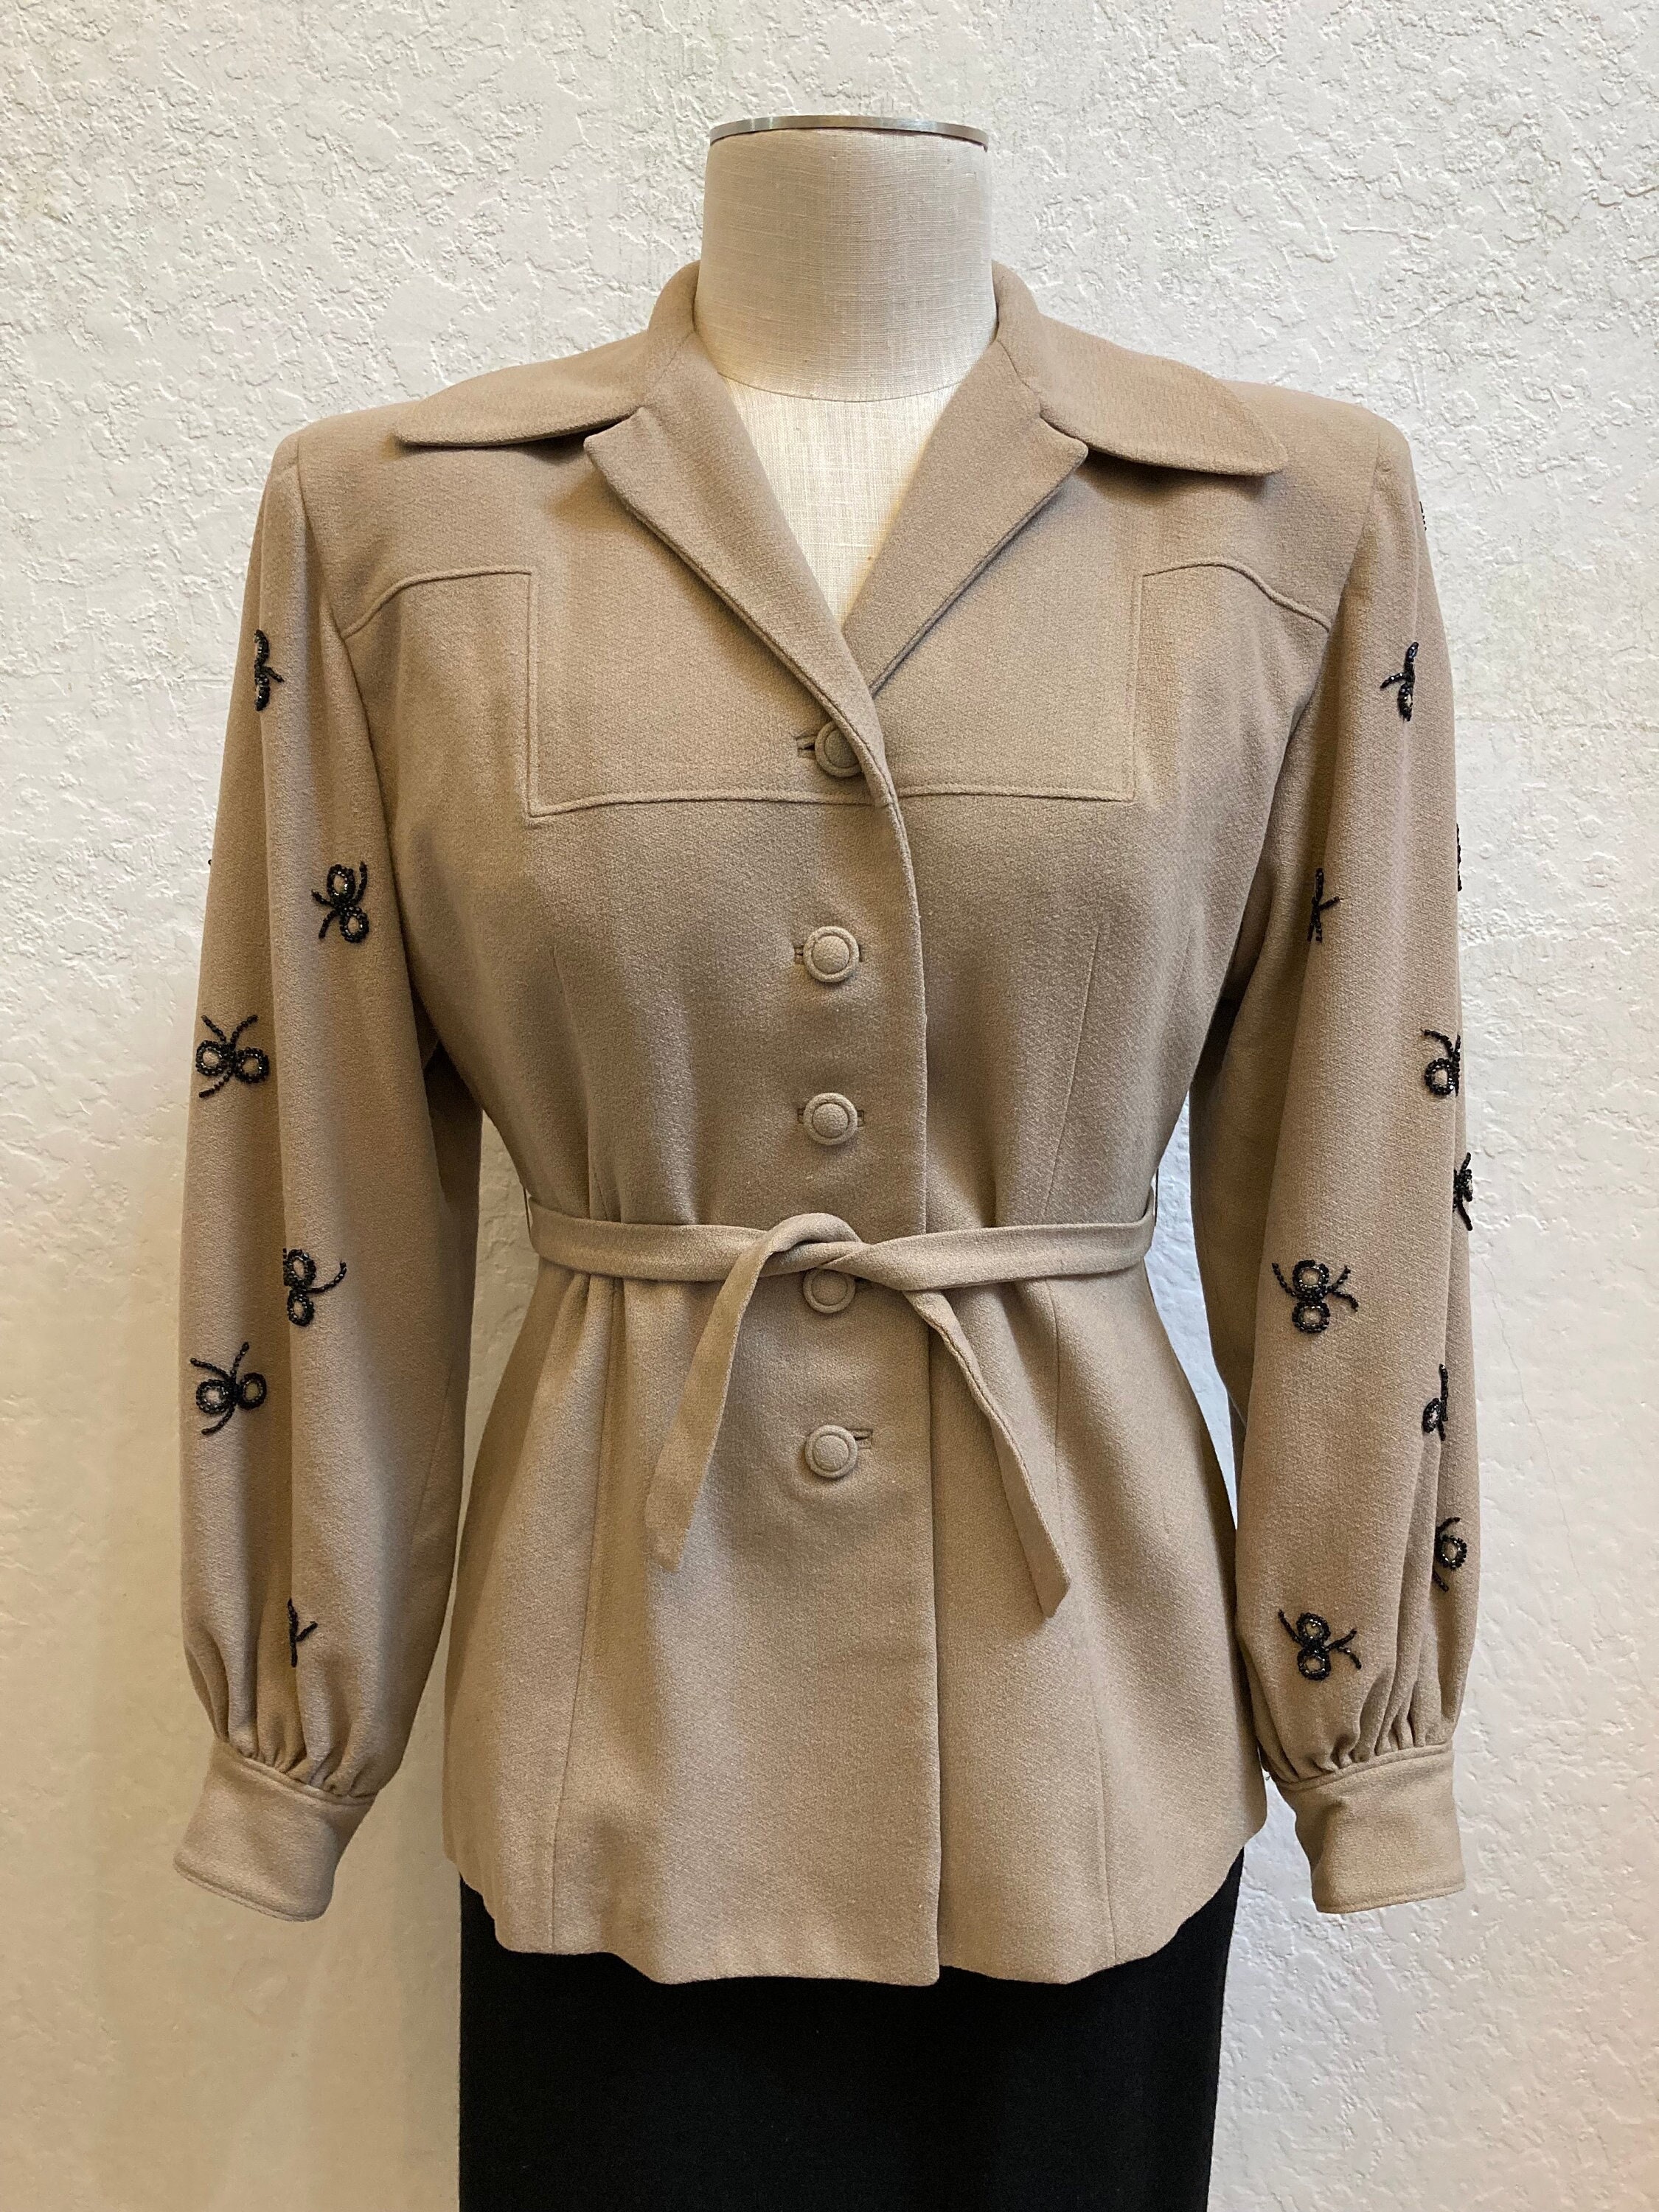 Real Vintage Search Engine 1940s Beige Wool Suit Jacket With Bows in Black  Grey Beads On SleevesWomens Size M $95.00 AT vintagedancer.com